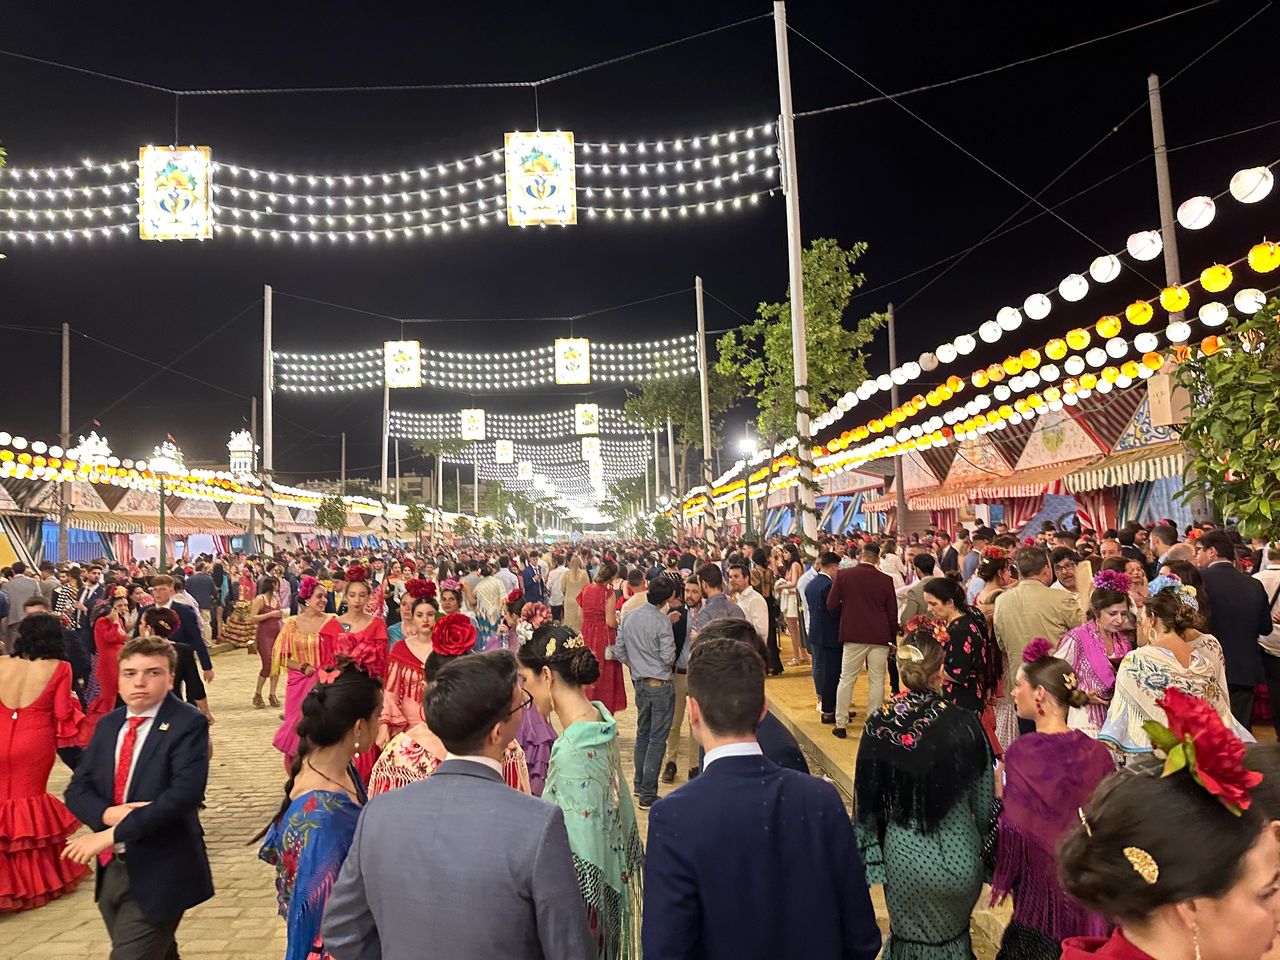 With over 1,000 casetas, the Feria is truly impressive